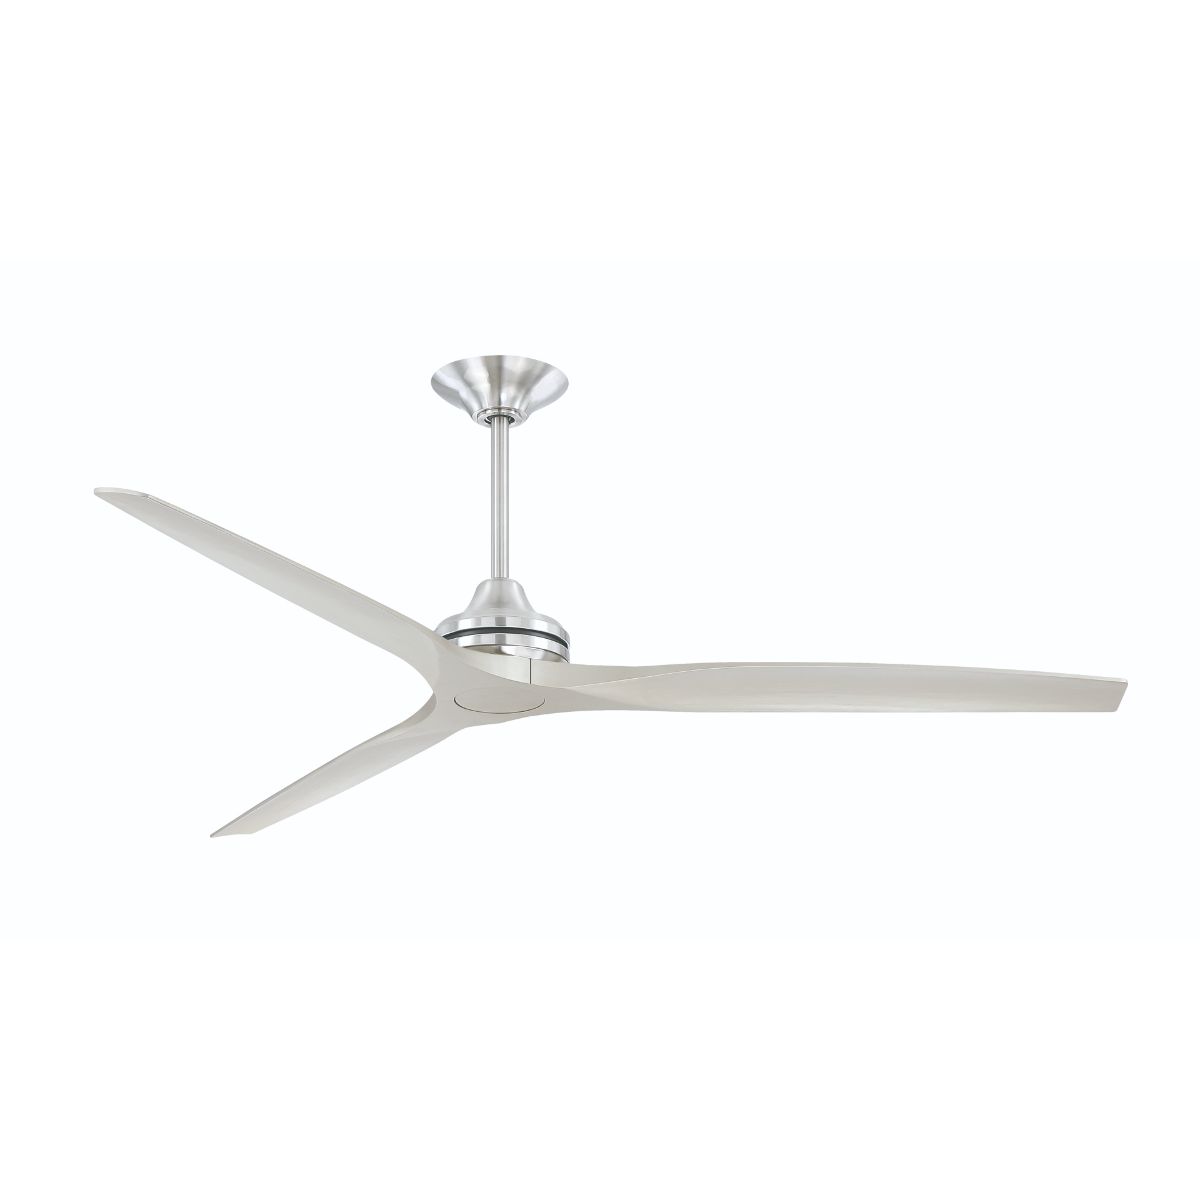 Spitfire DC Outdoor Ceiling Fan Motor With Remote, Brushed Nickel Finish, Set of 3 Blades Sold Separately